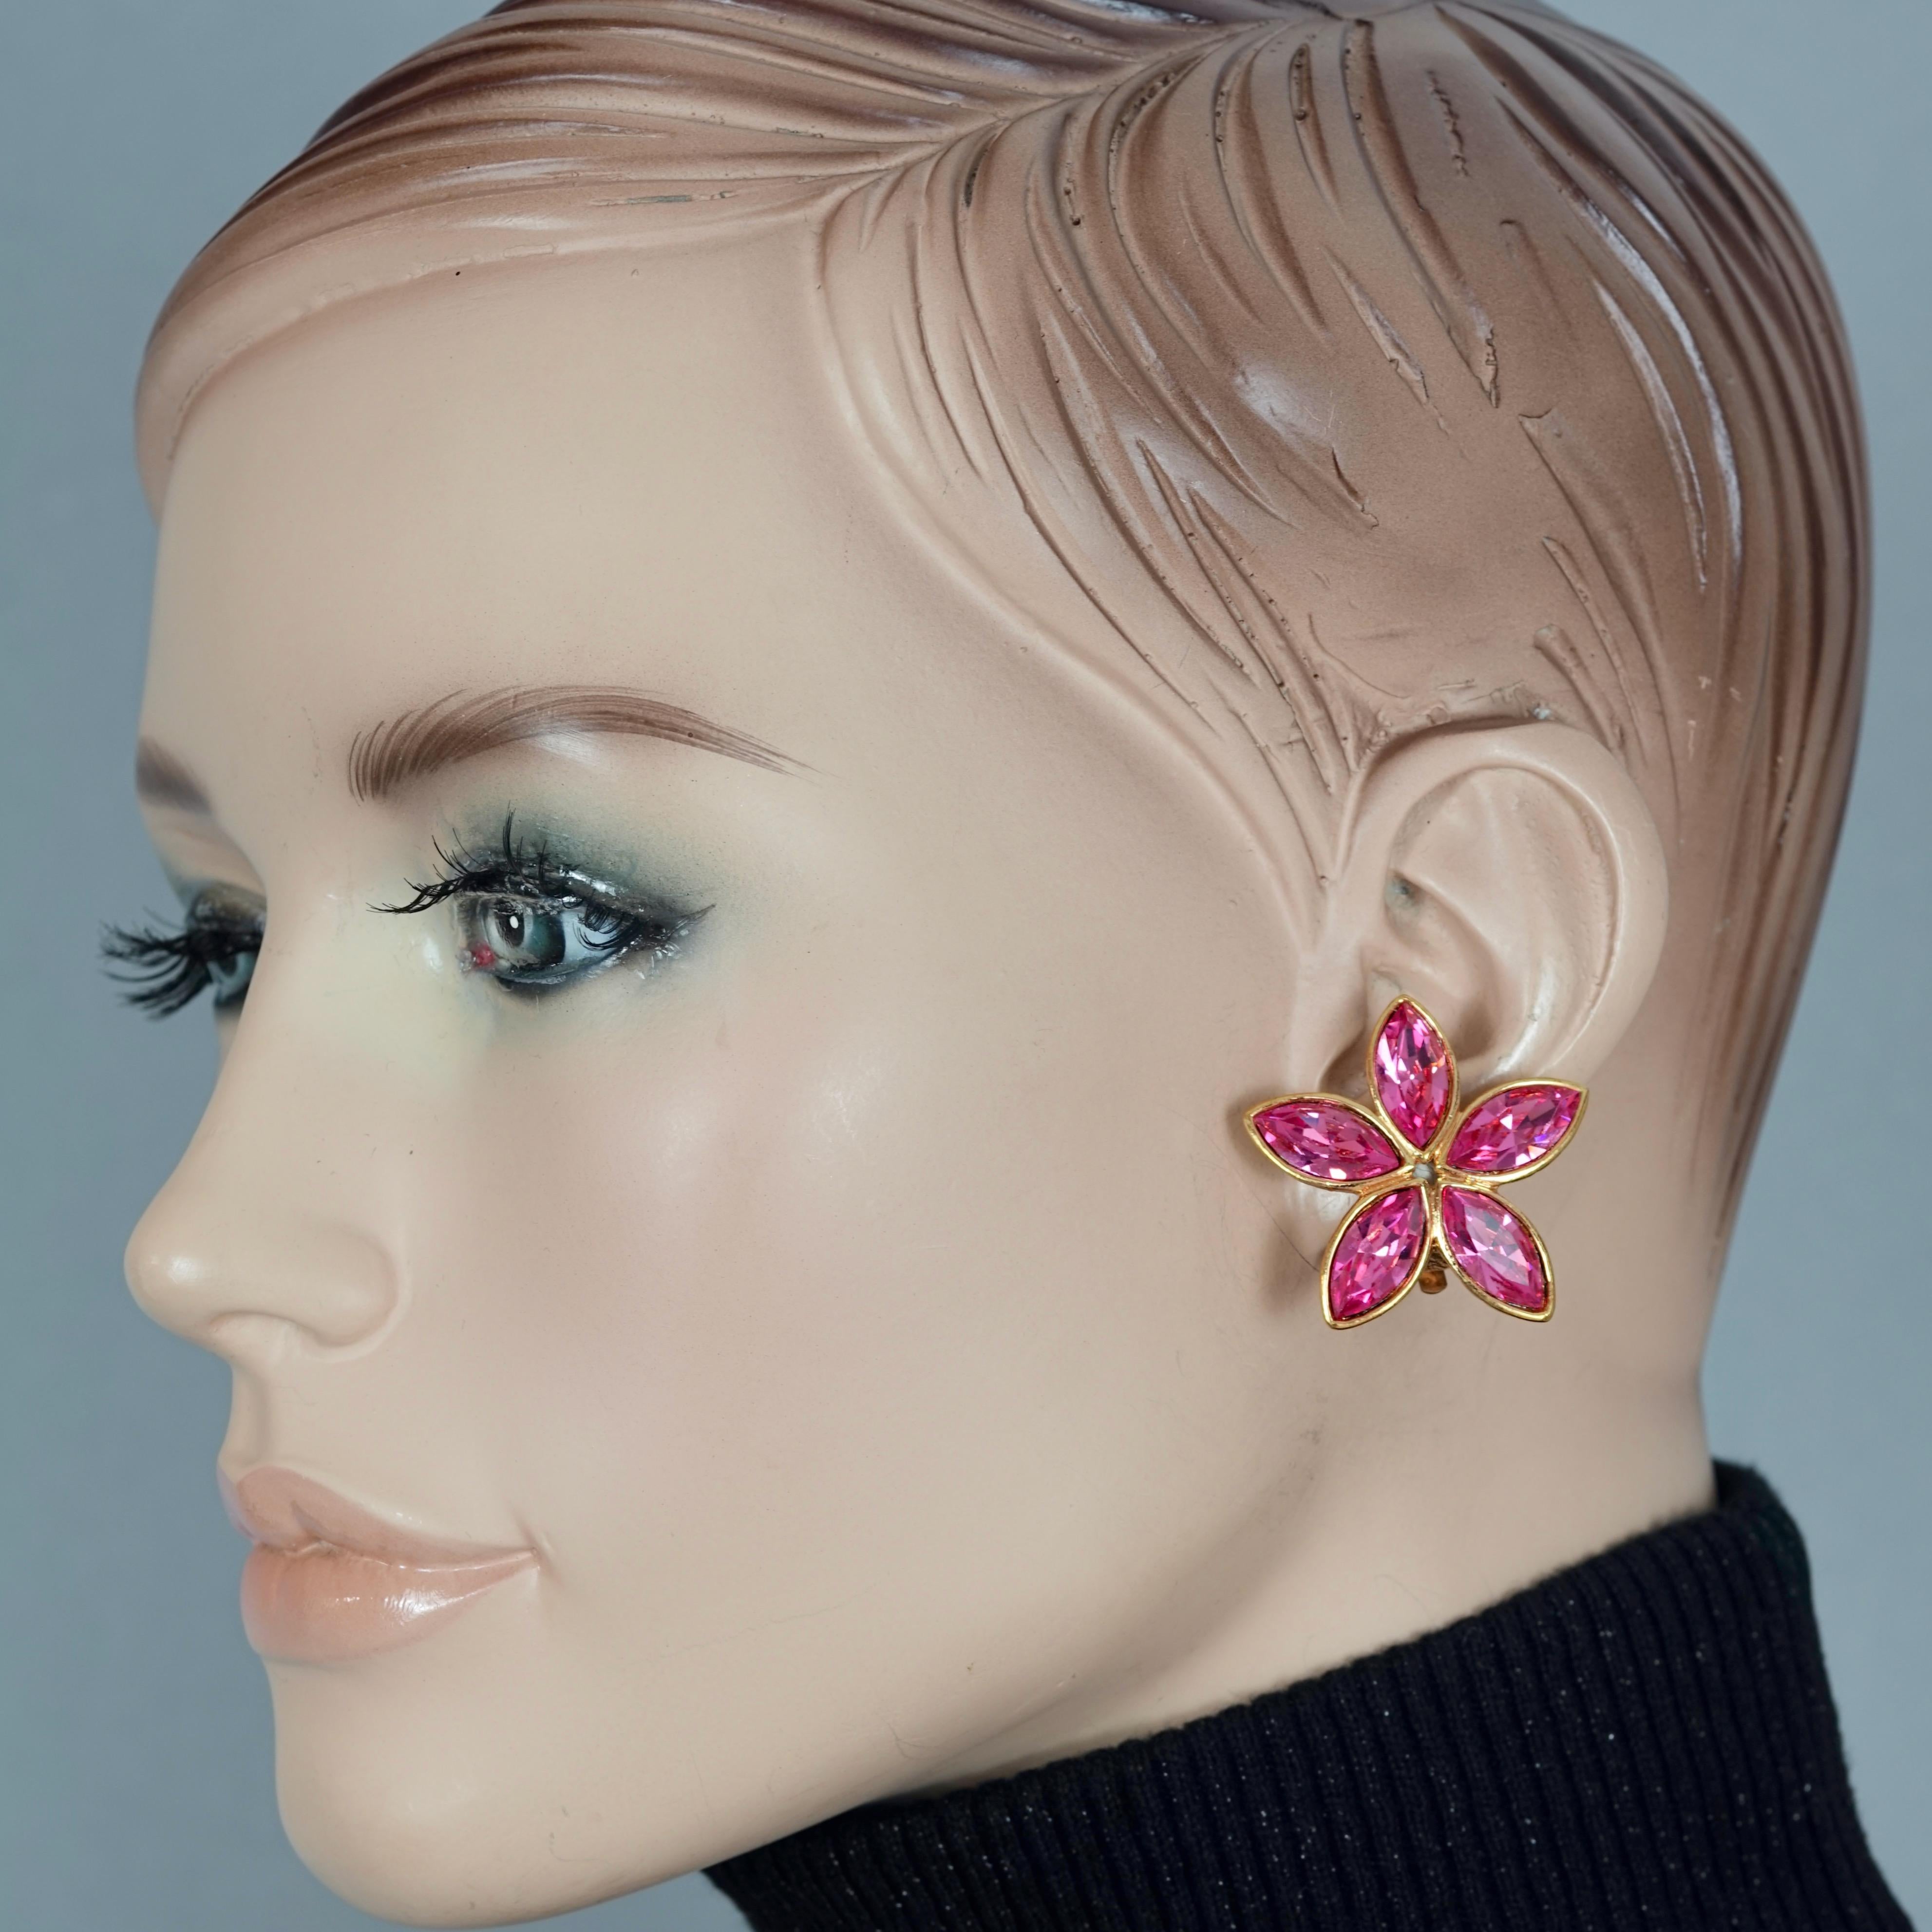 Vintage YVES SAINT LAURENT Ysl by Robert Goossens Pink Rhinestone Flower Earring

Measurements:
Height: 1.33 inches (3.4 cm)
Width: 1.33 inches (3.4 cm)
Weight per Earring: 12 grams

Features:
- 100% Authentic YVES SAINT LAURENT by Robert